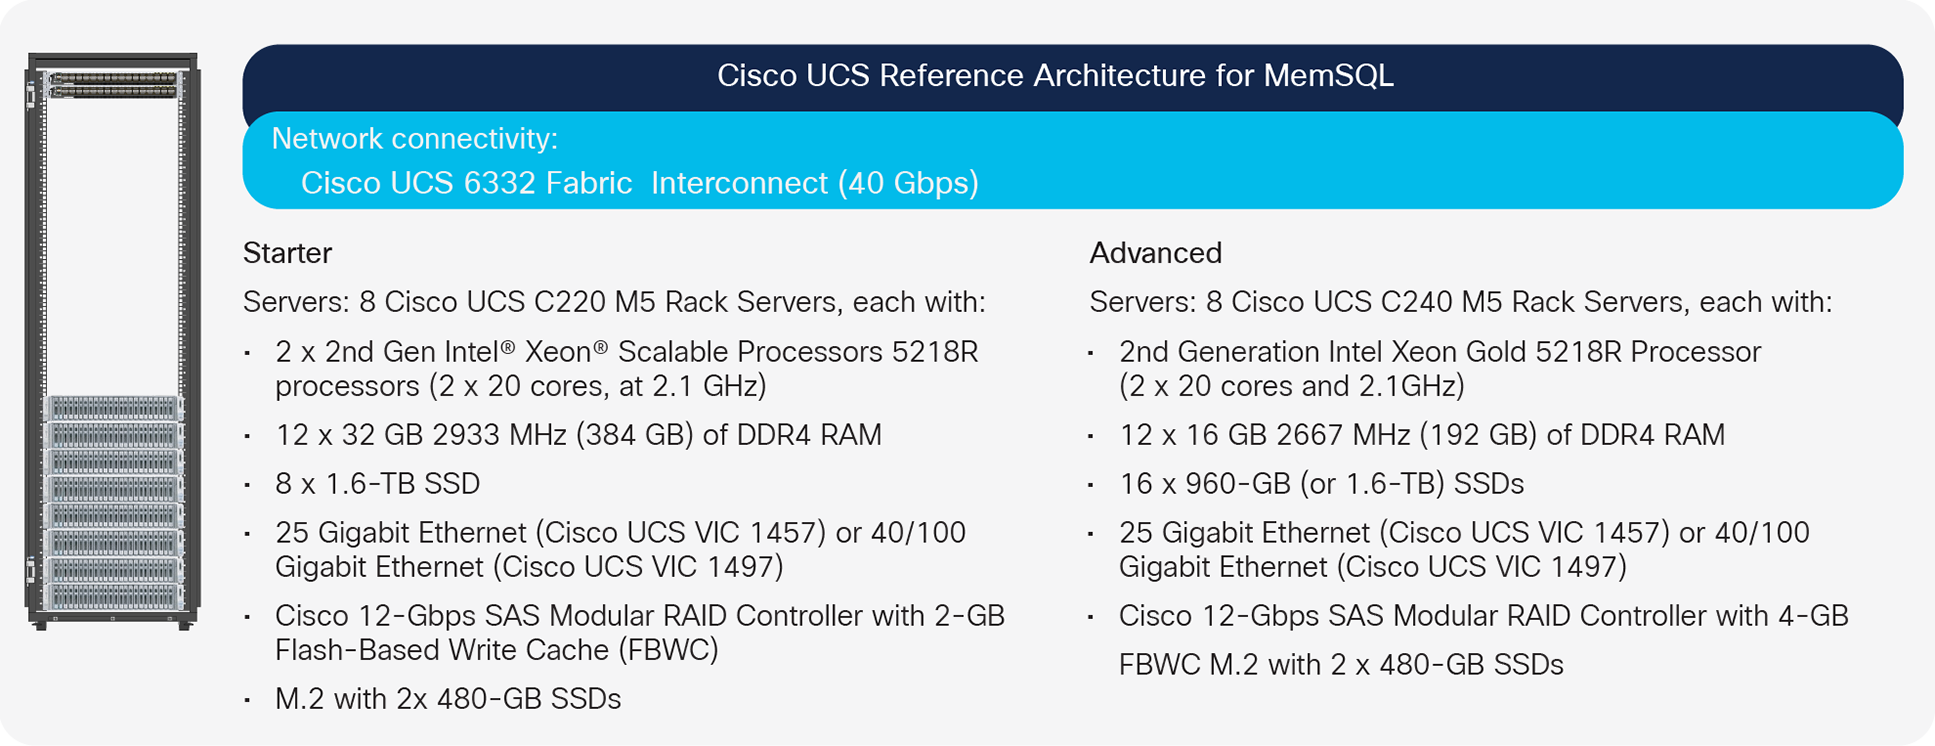 Cisco UCS Reference Architecture for MemSQL